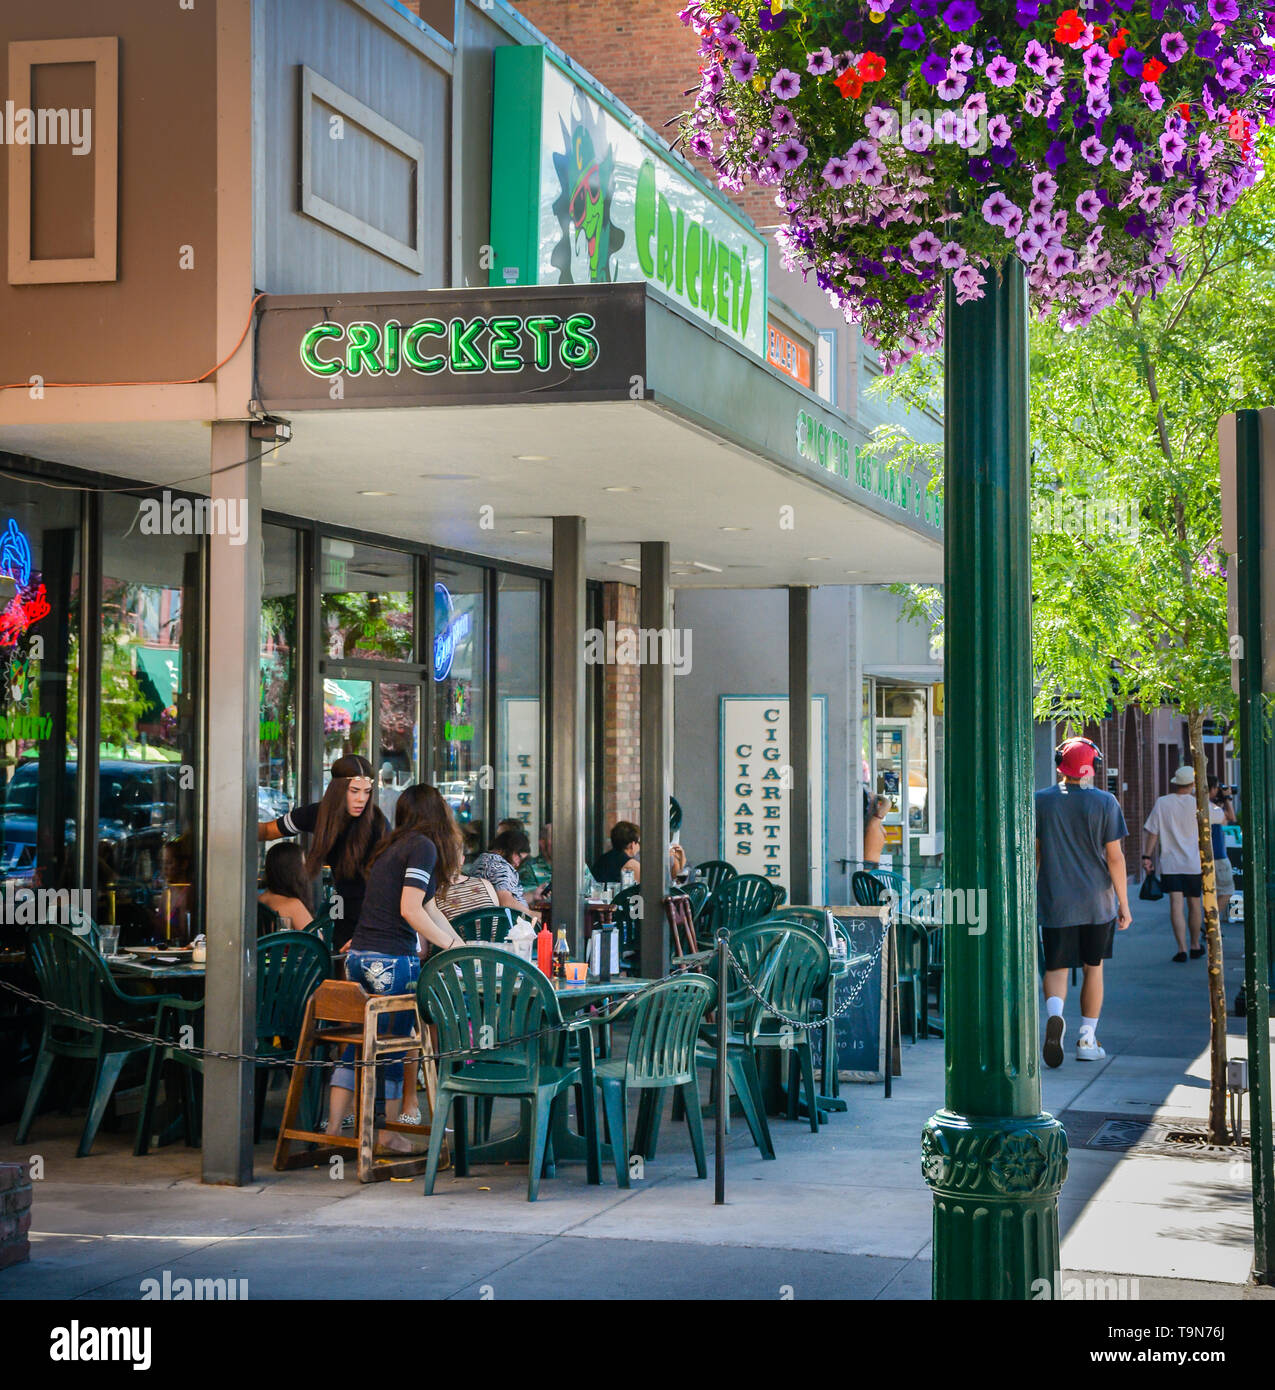 The patio at Cricket's Bar with outdoor dining reflects the relaxed colorful summer vibe with tourists enjoying downtown Coeur d'Alene, ID Stock Photo